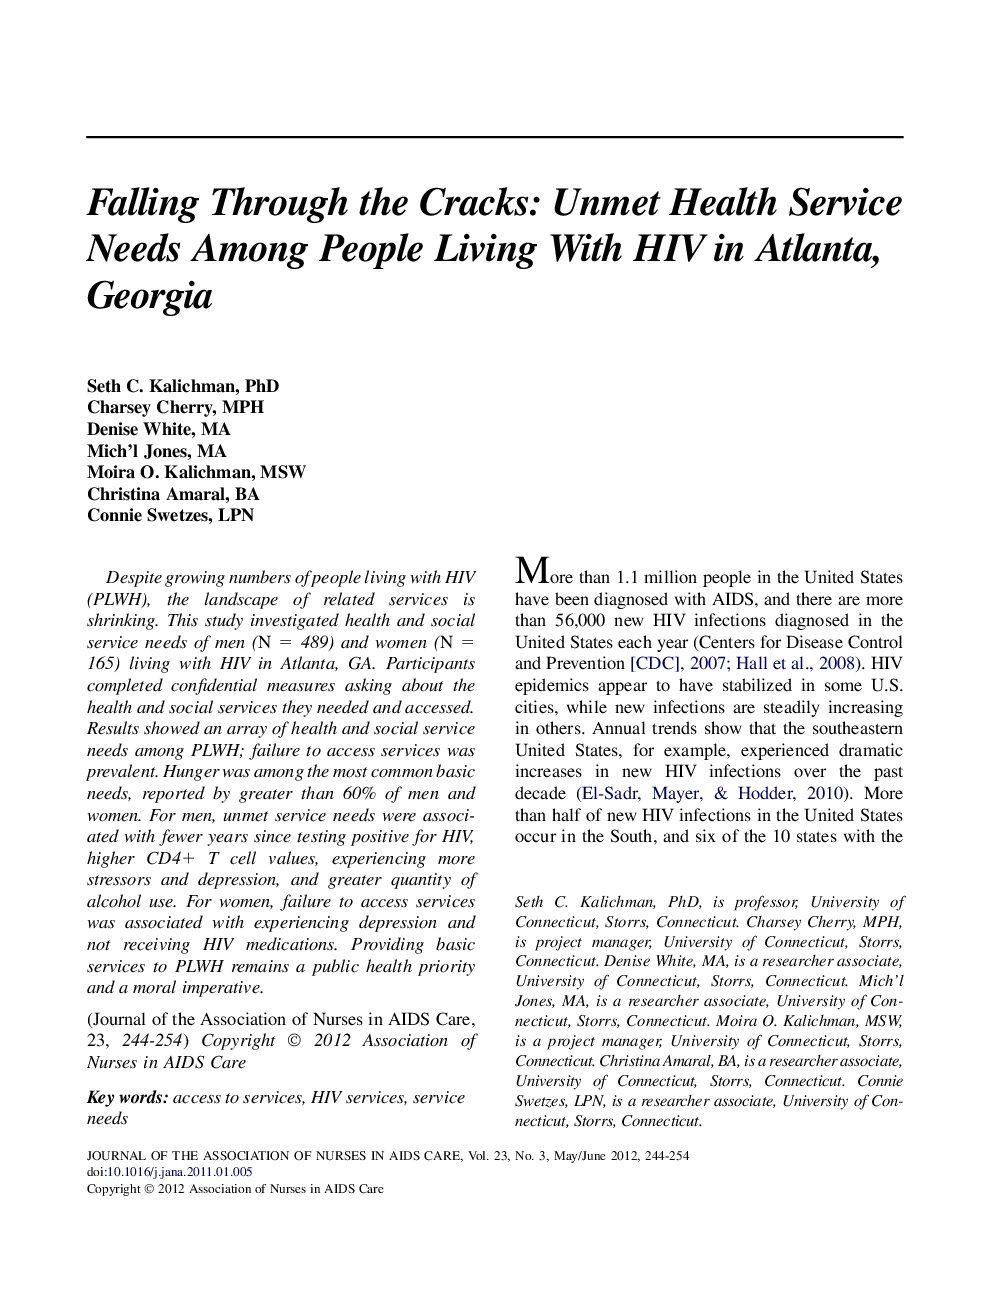 Falling Through the Cracks: Unmet Health Service Needs Among People Living With HIV in Atlanta, Georgia